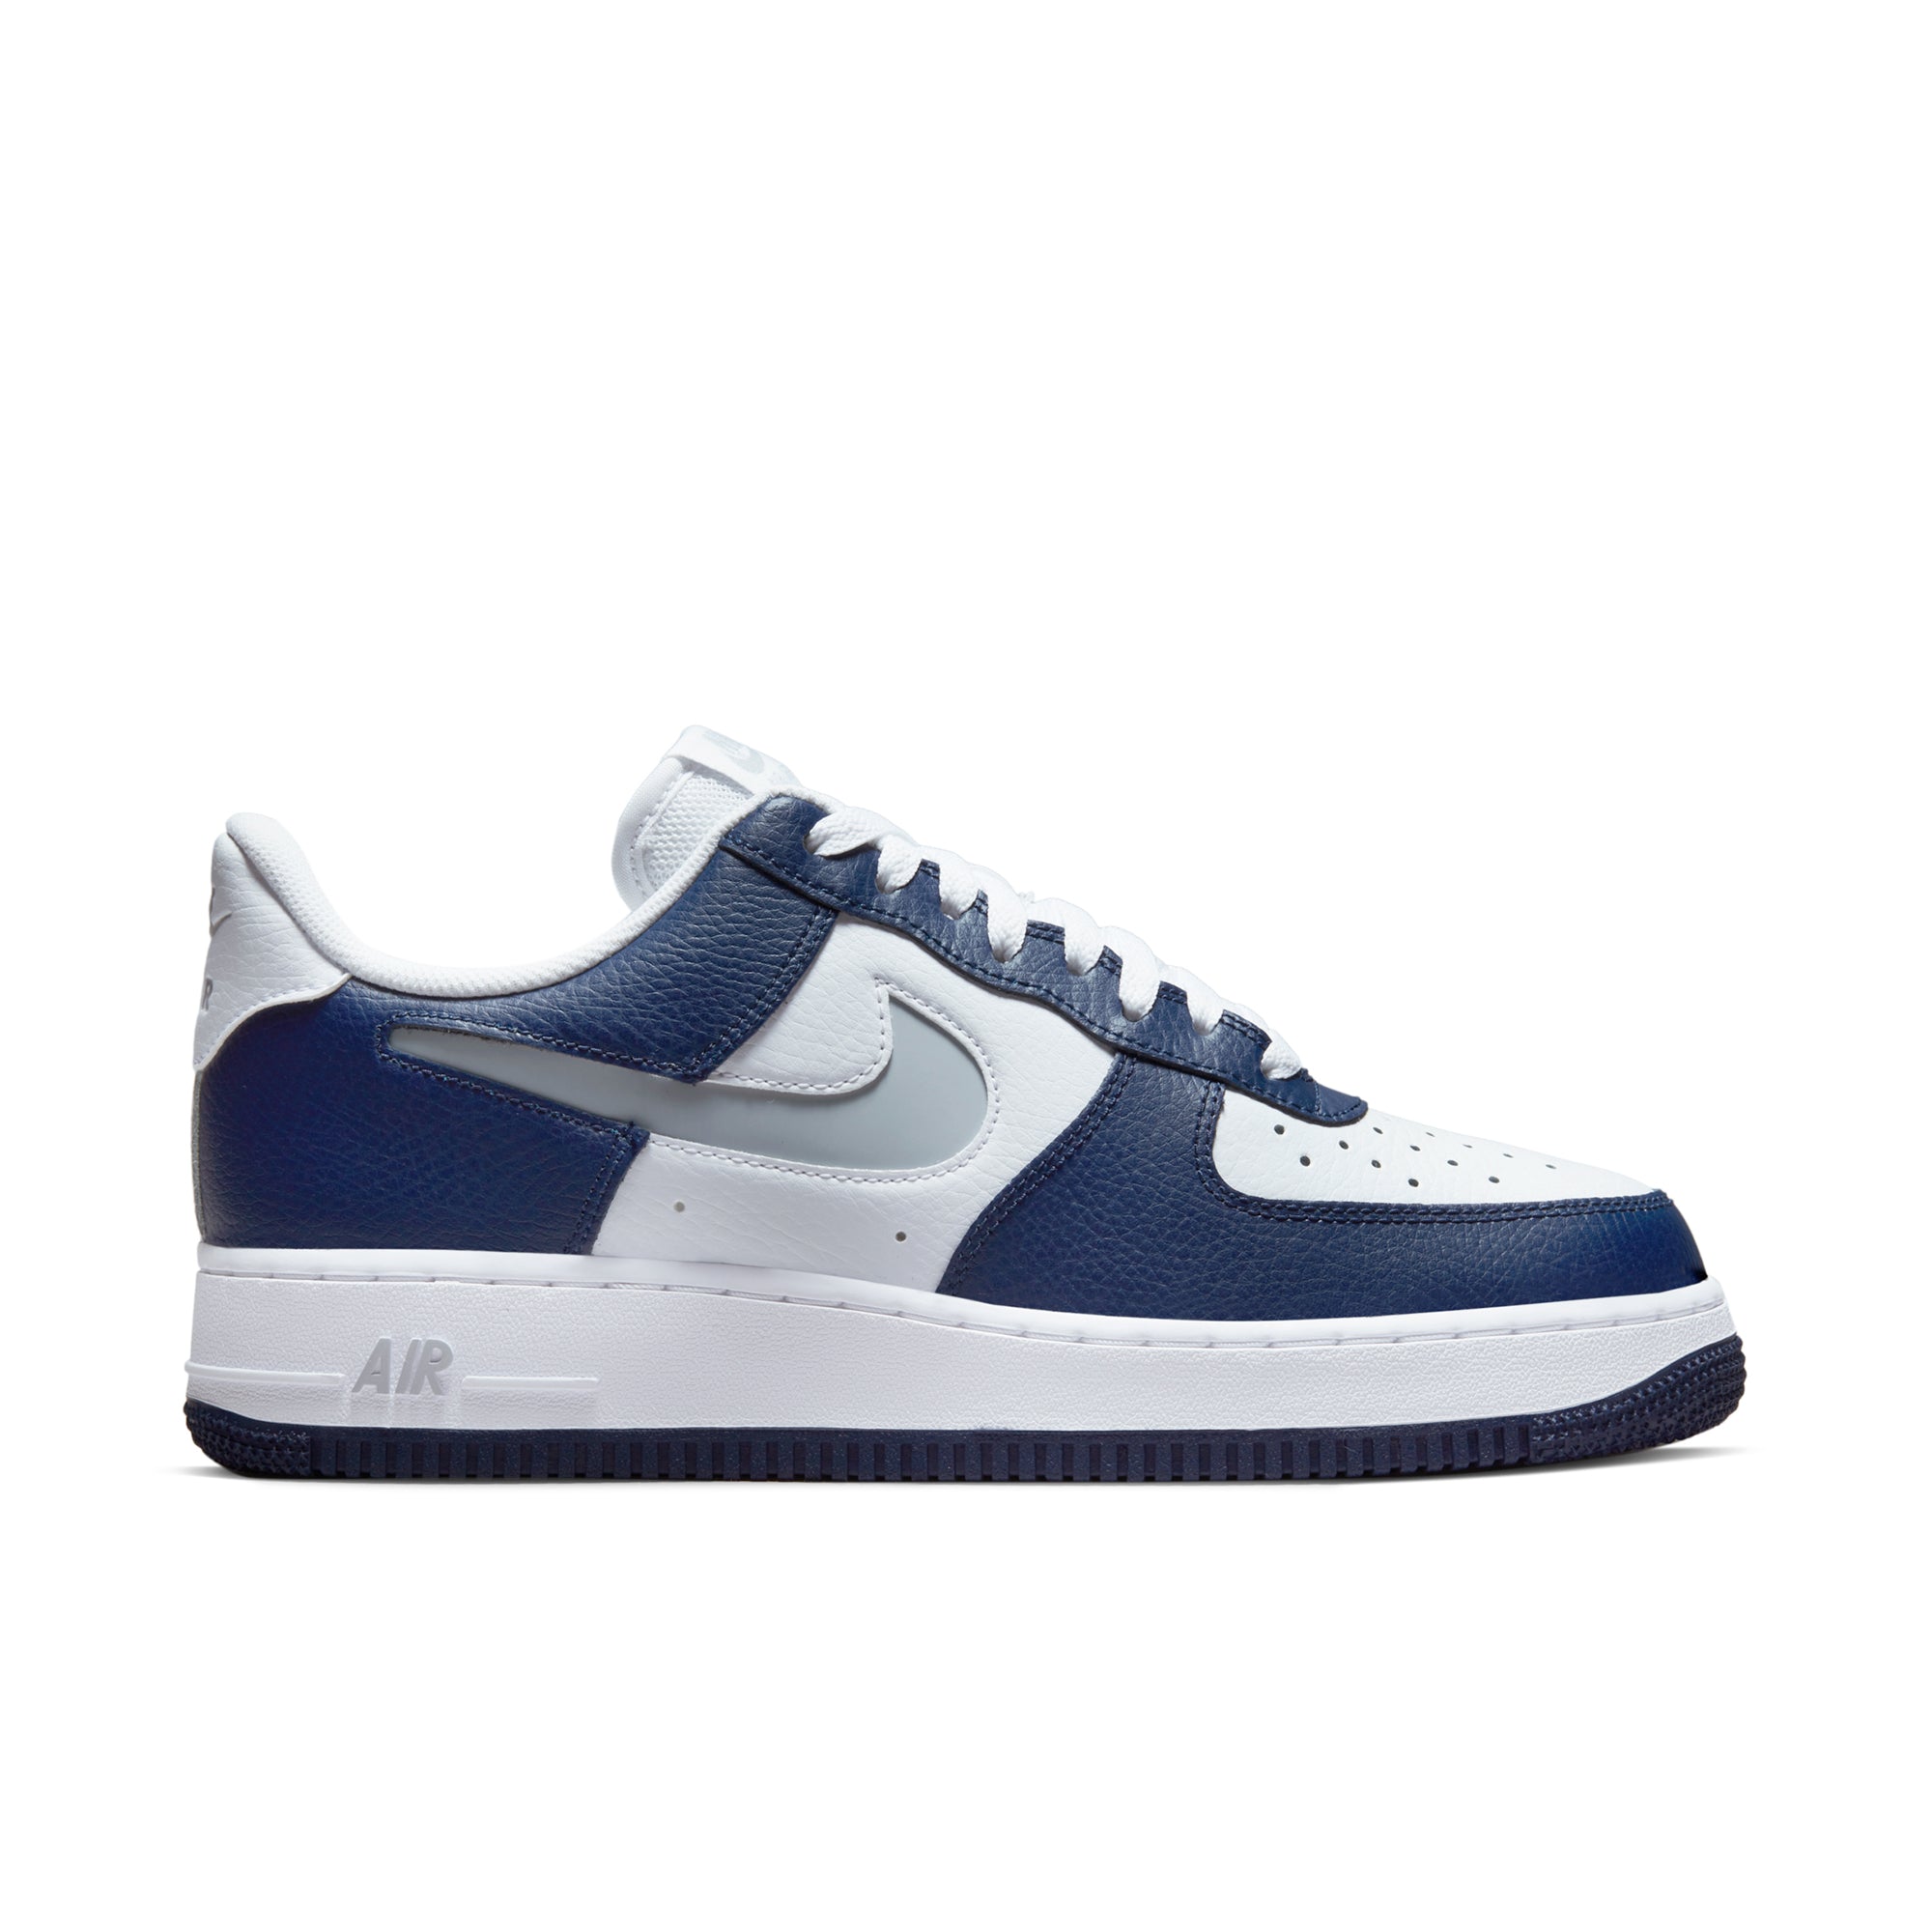 nike air force 1 low white and black Nike Air Force 1 Low White Navy Grey